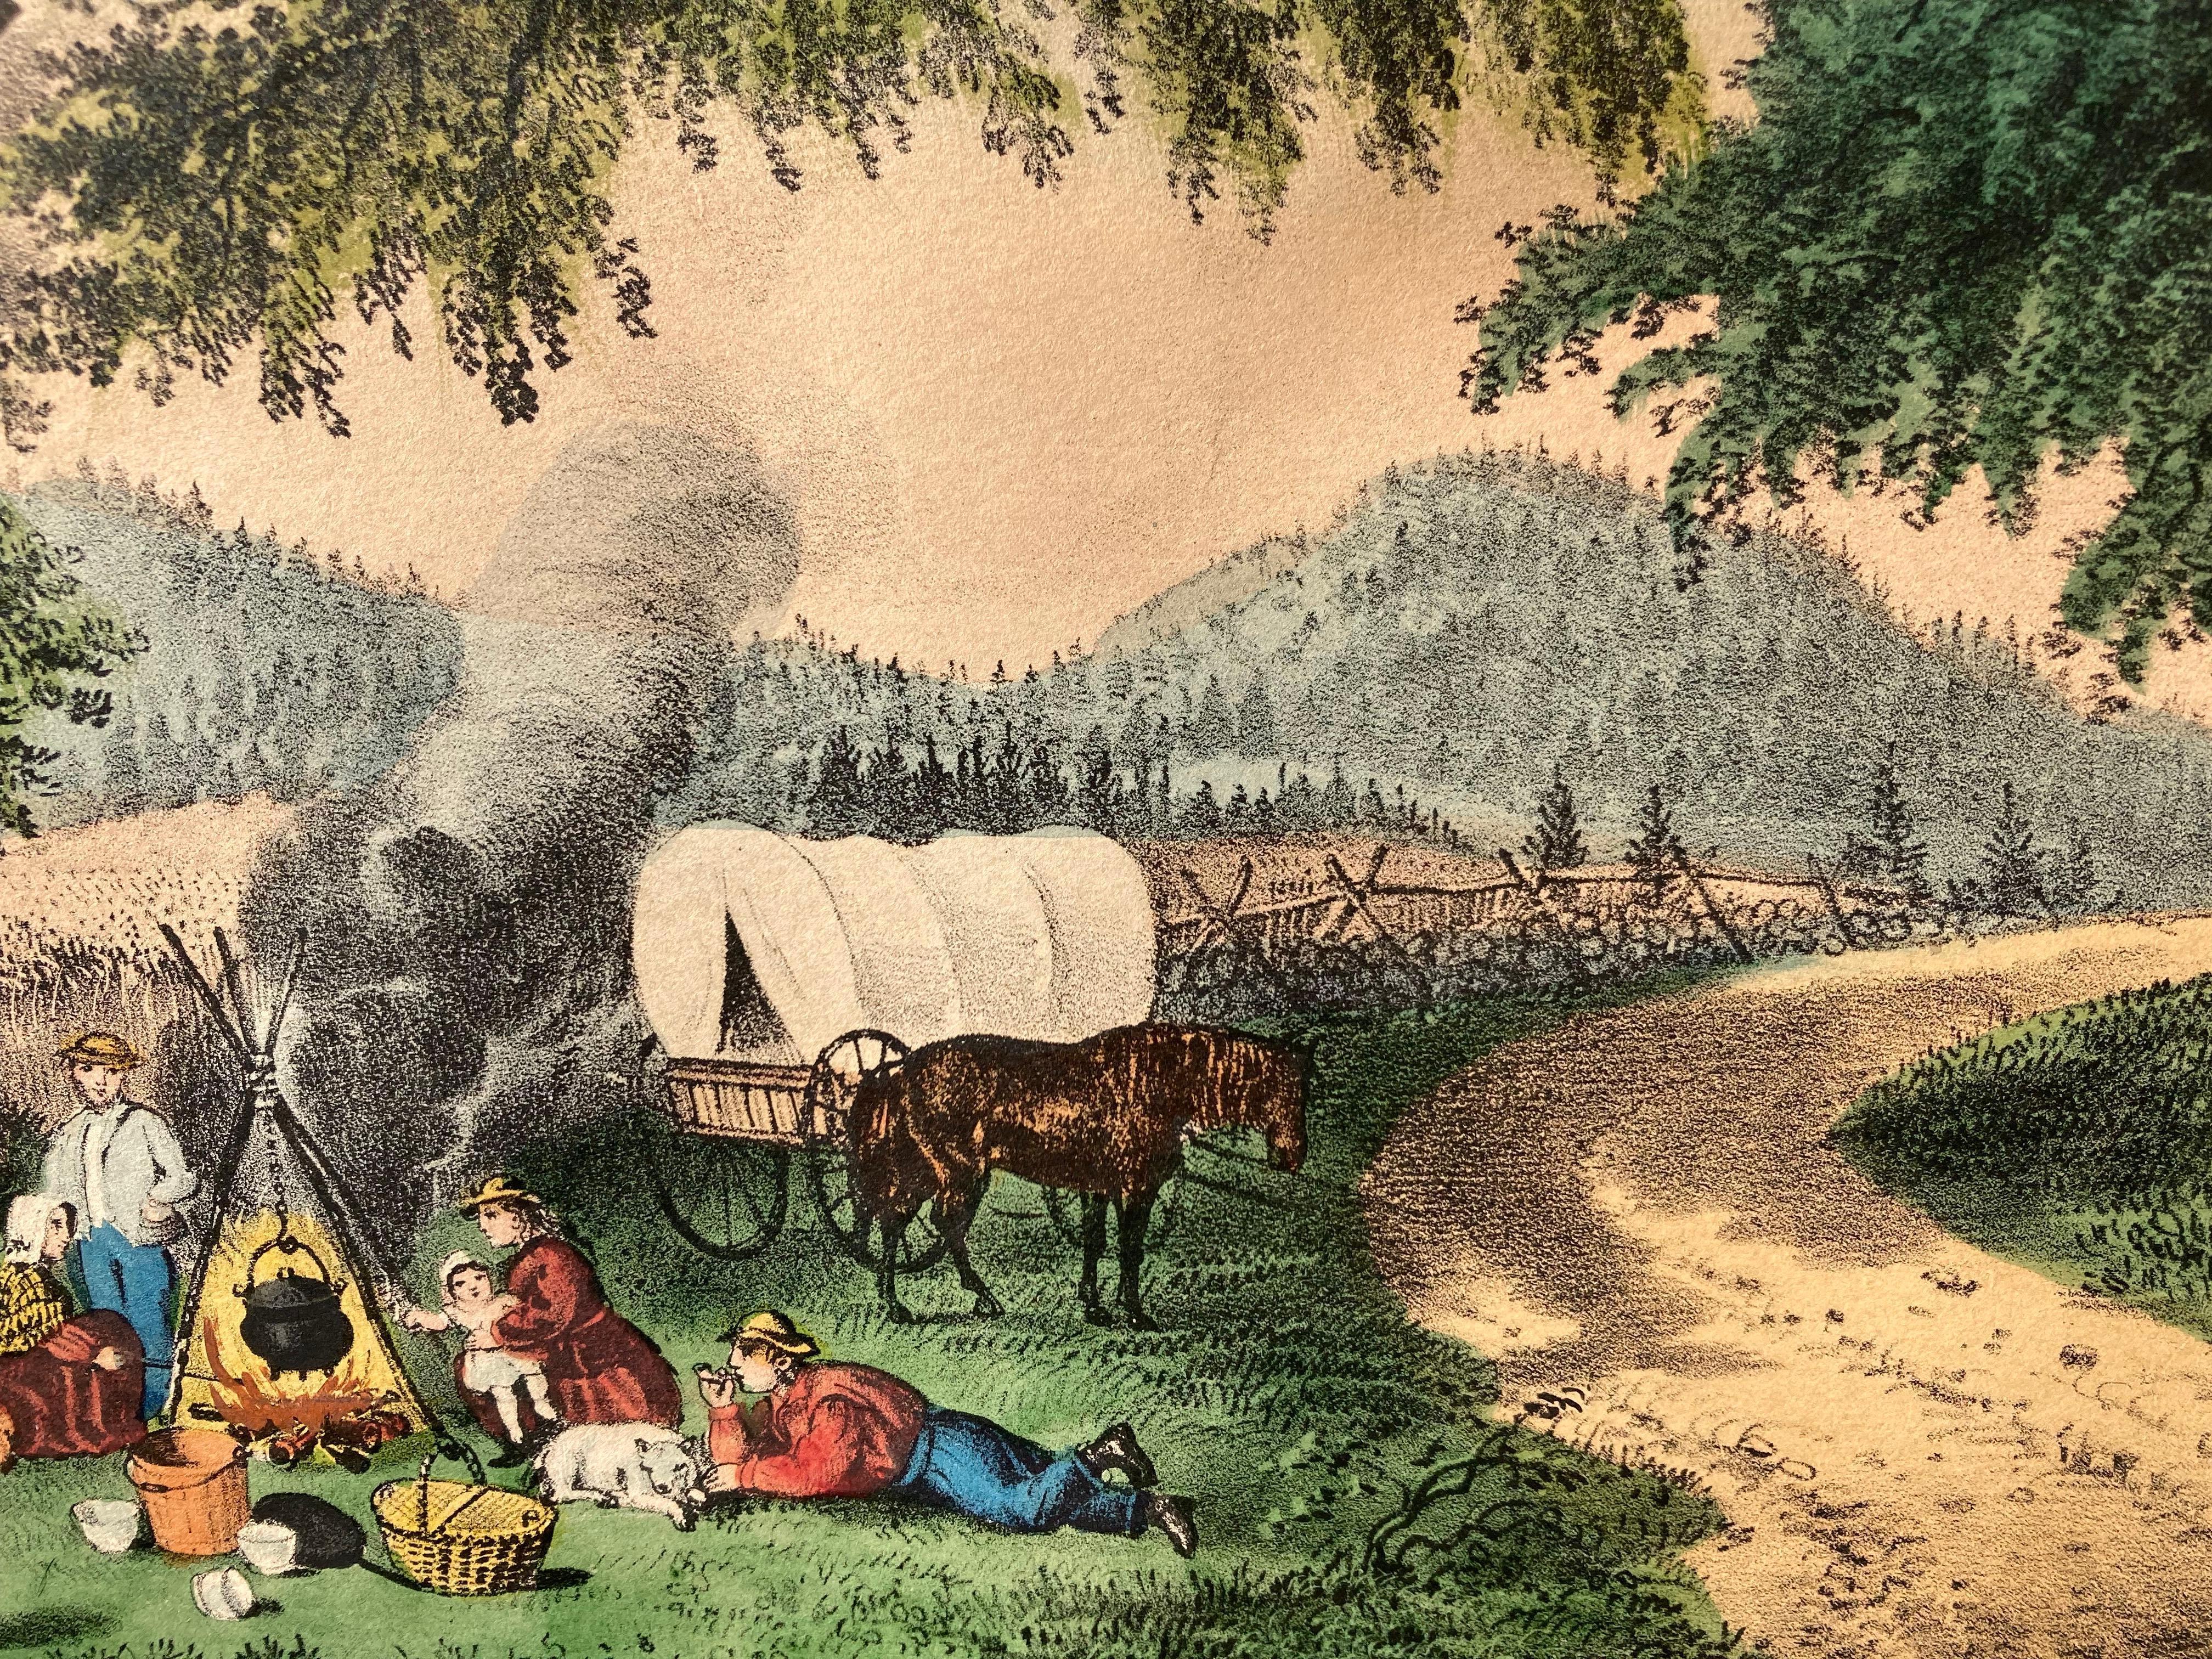 A HALT BY THE WAYSIDE - Gray Landscape Print by Currier & Ives